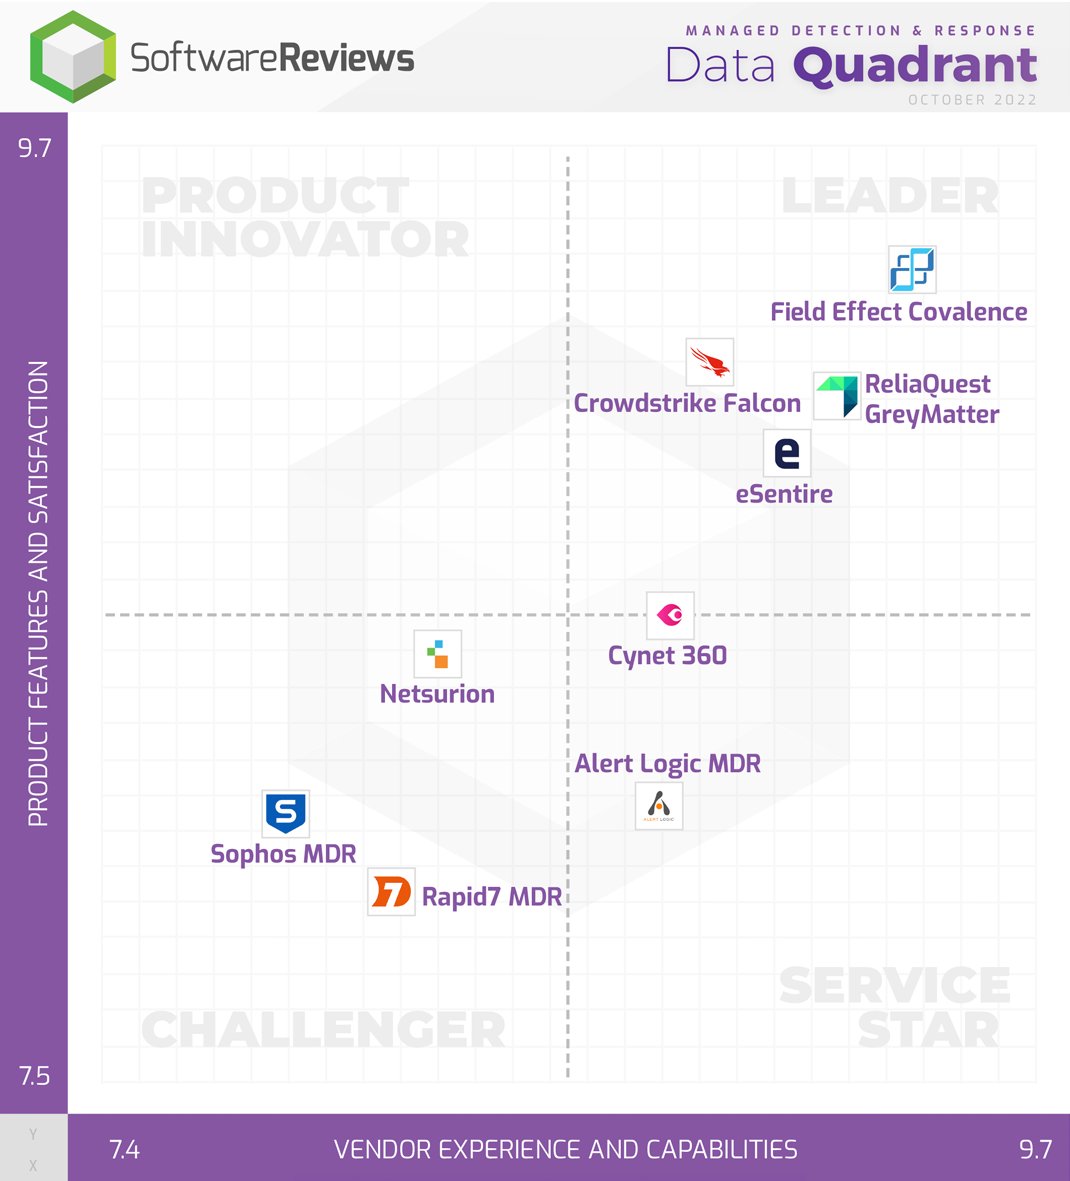 Discover the 2022 Managed Detection & Response Data Quadrant Award champions! 

Way to go @fieldeffectsoft, @ReliaQuest, @CrowdStrike, and @eSentire! 🎉

For more information: bit.ly/3yOjyPb

#ManagedDetectionAndResponse #Software #Awards2022